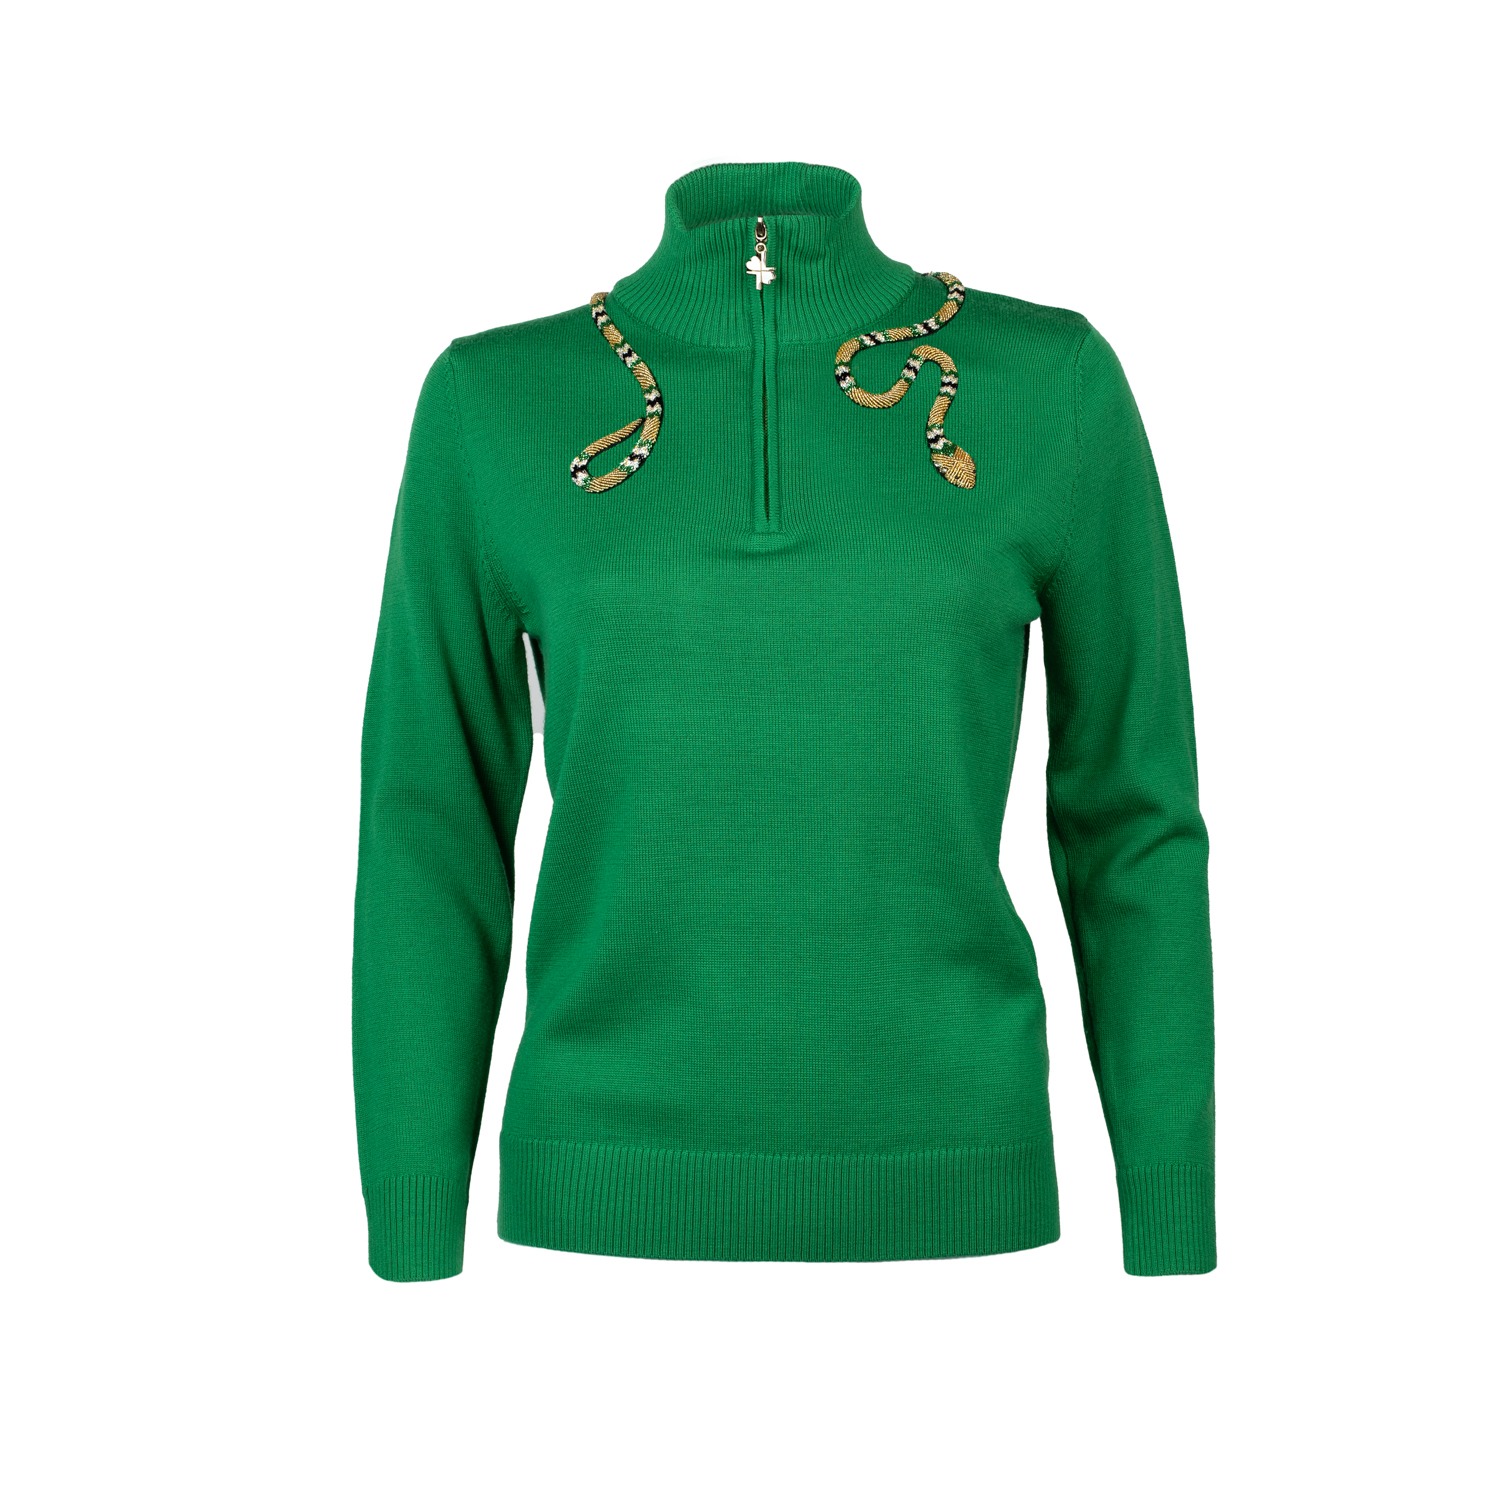 Laines London Women's Laines Couture Quarter Zip Green Jumper With Embellished Green & Gold Wrap Snake